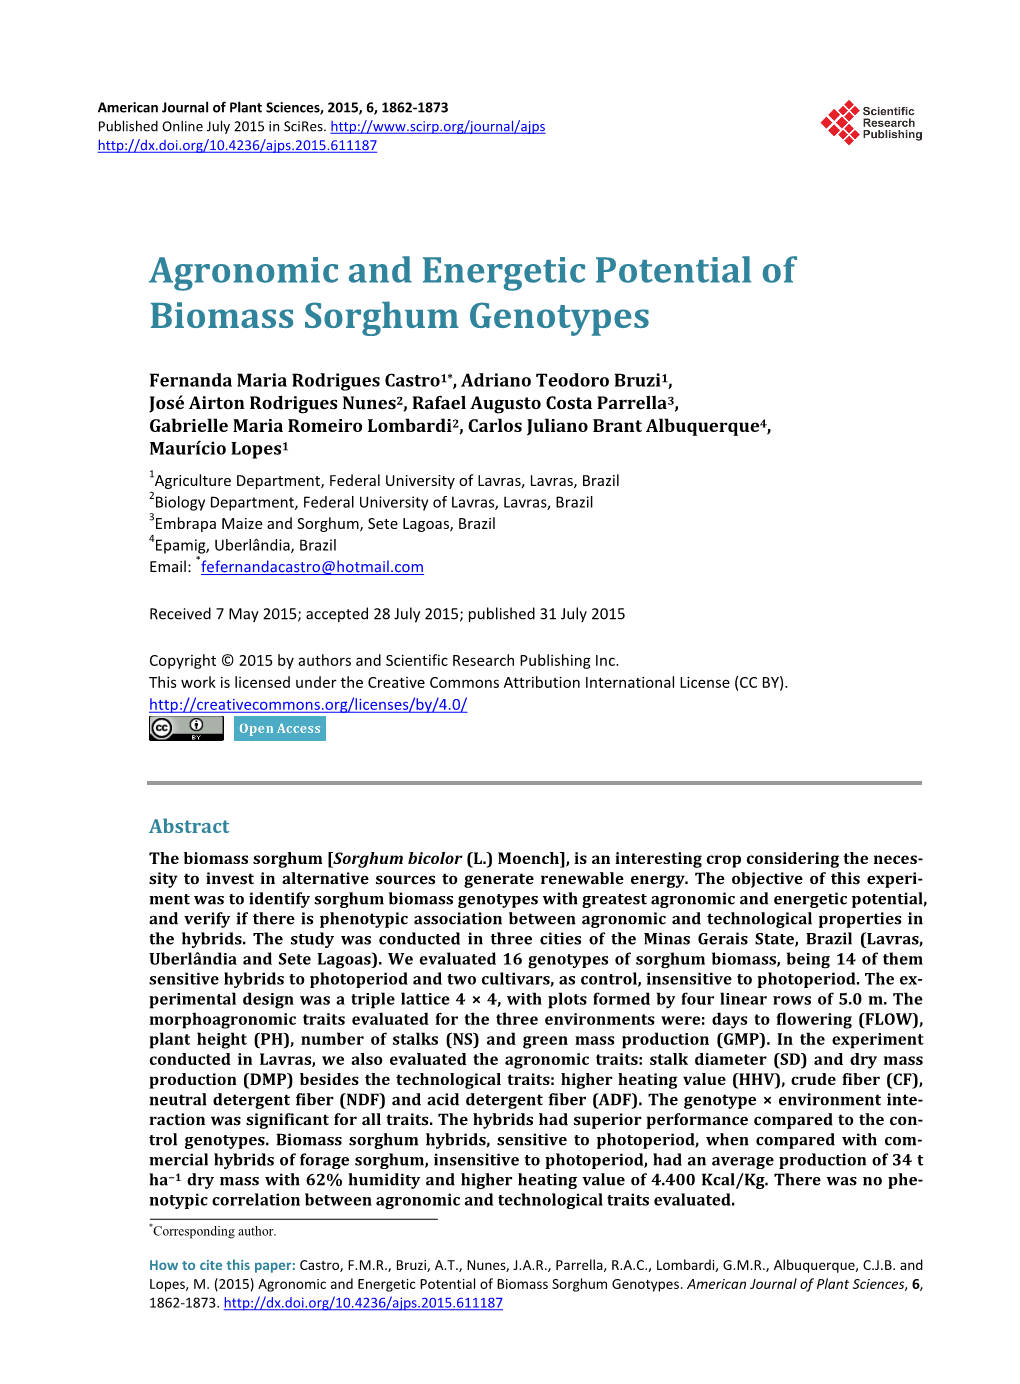 Agronomic and Energetic Potential of Biomass Sorghum Genotypes